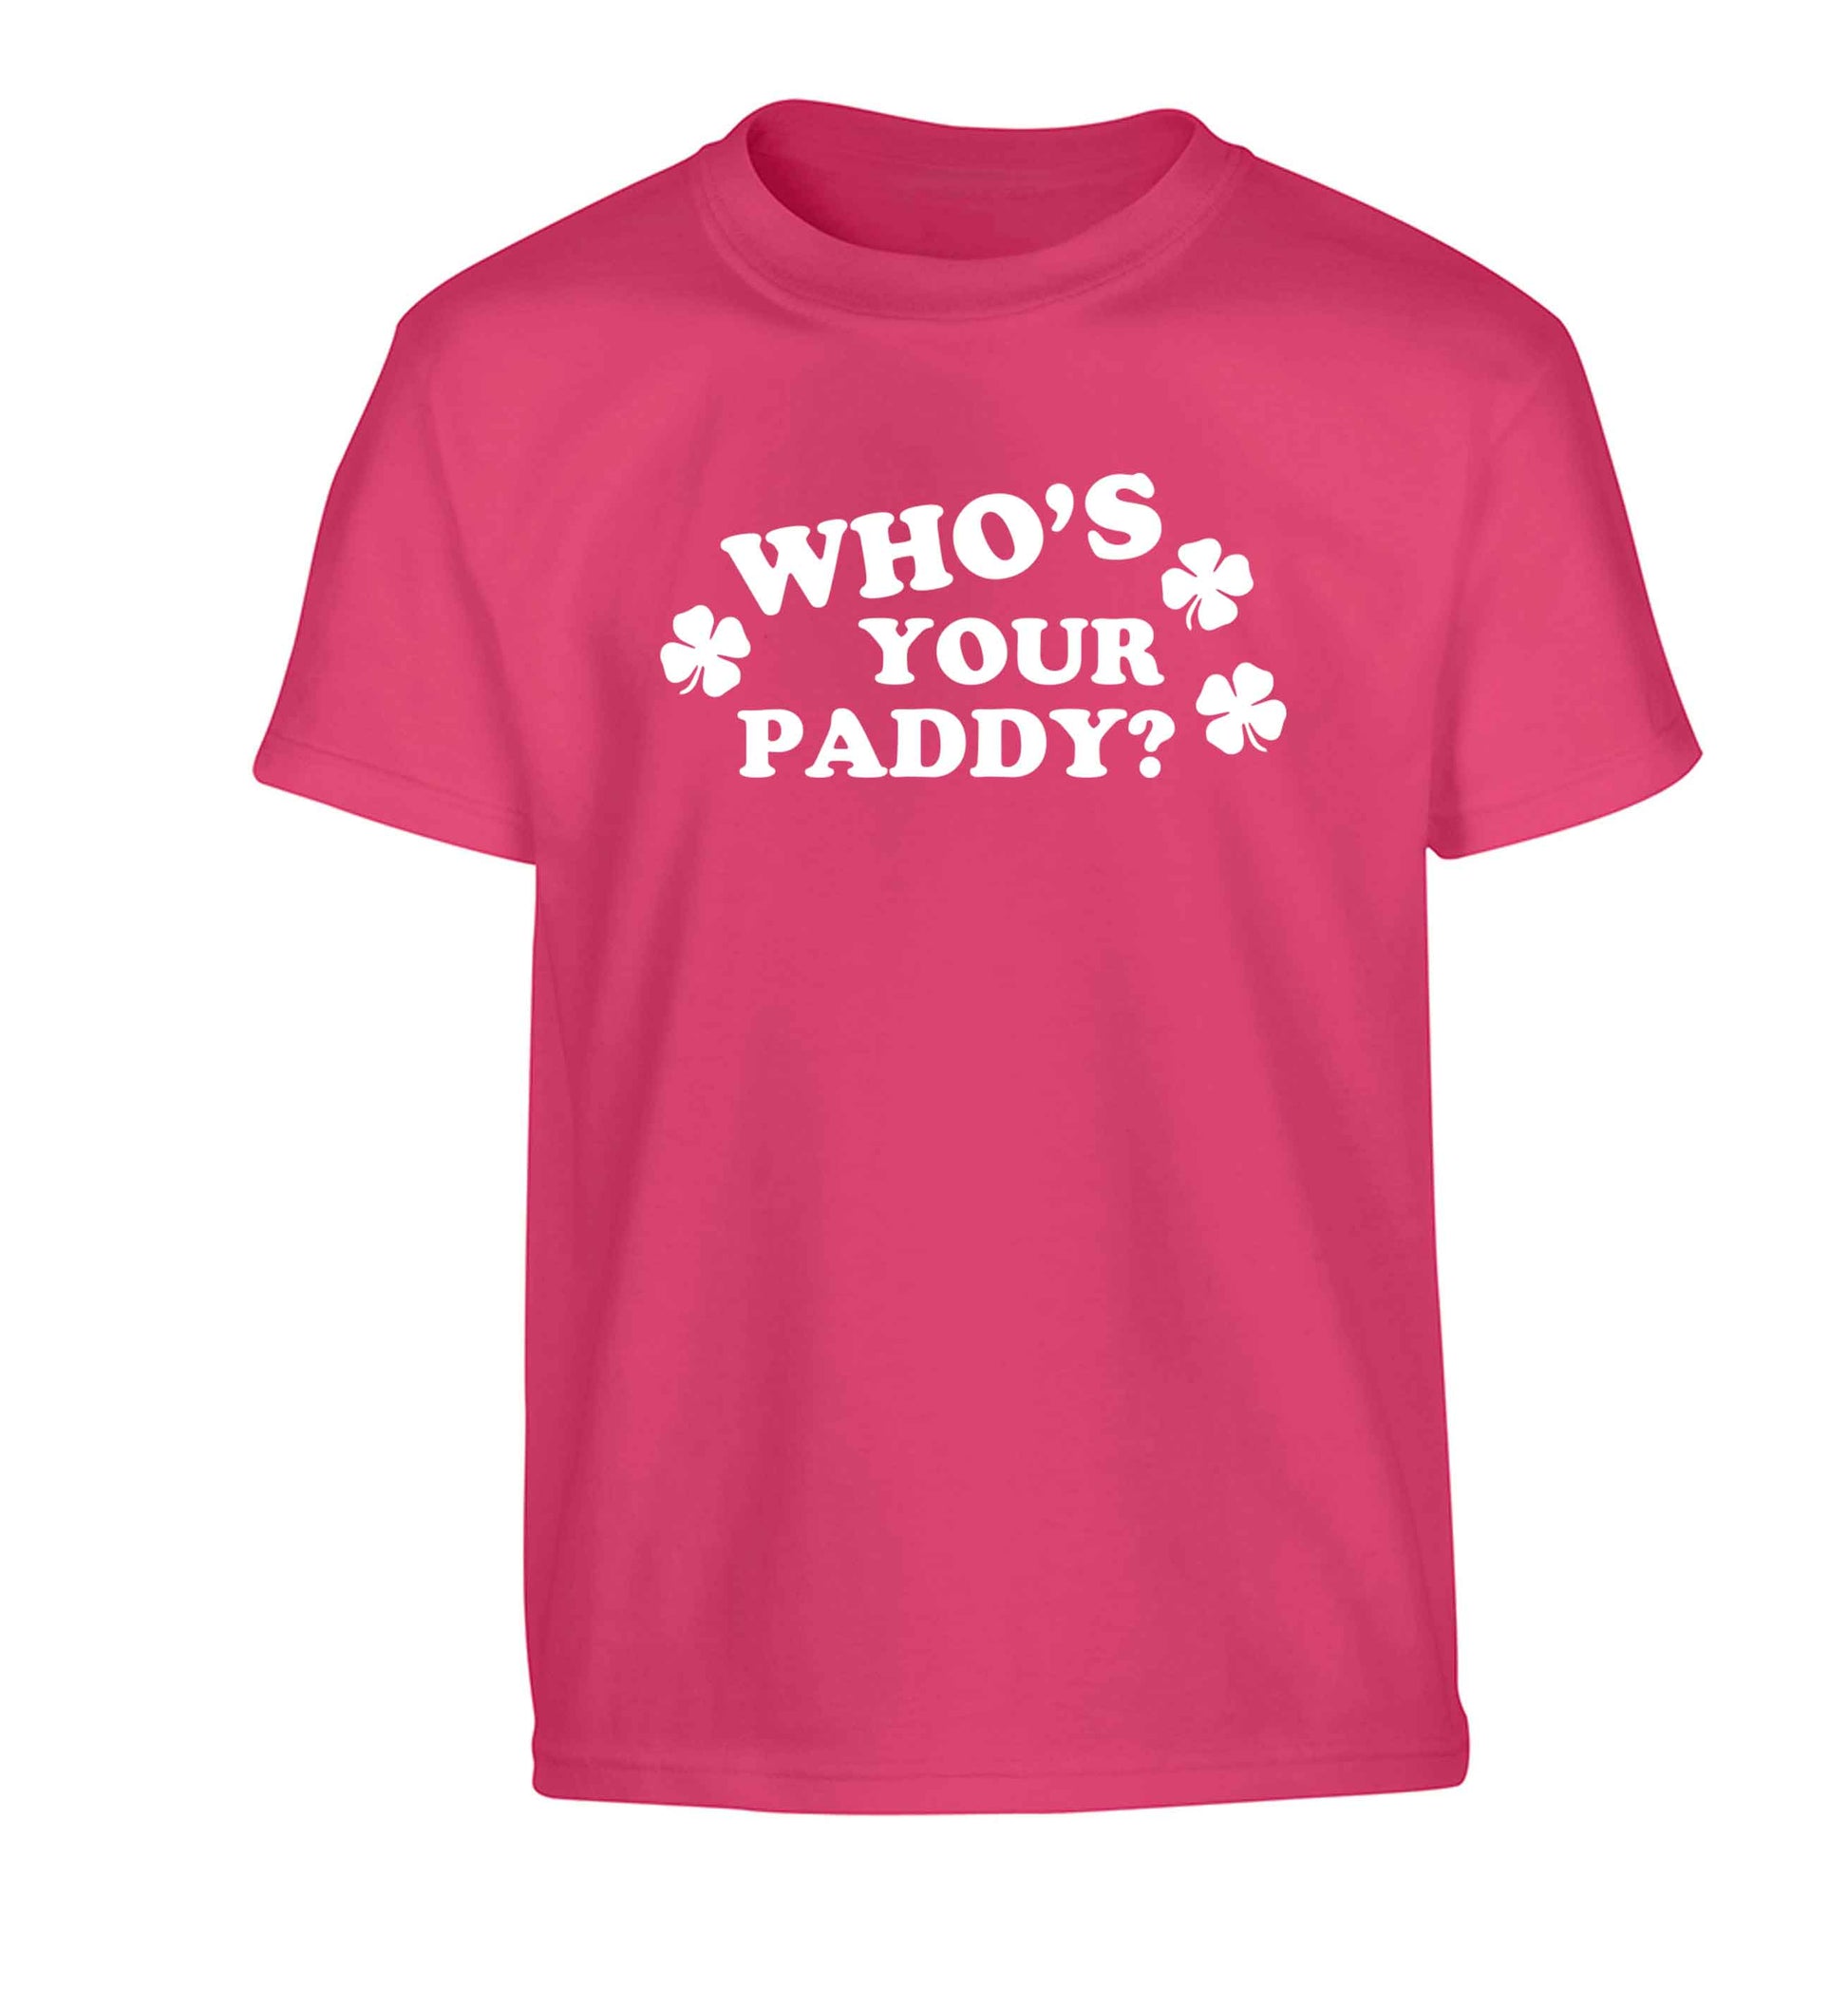 Who's your paddy? Children's pink Tshirt 12-13 Years